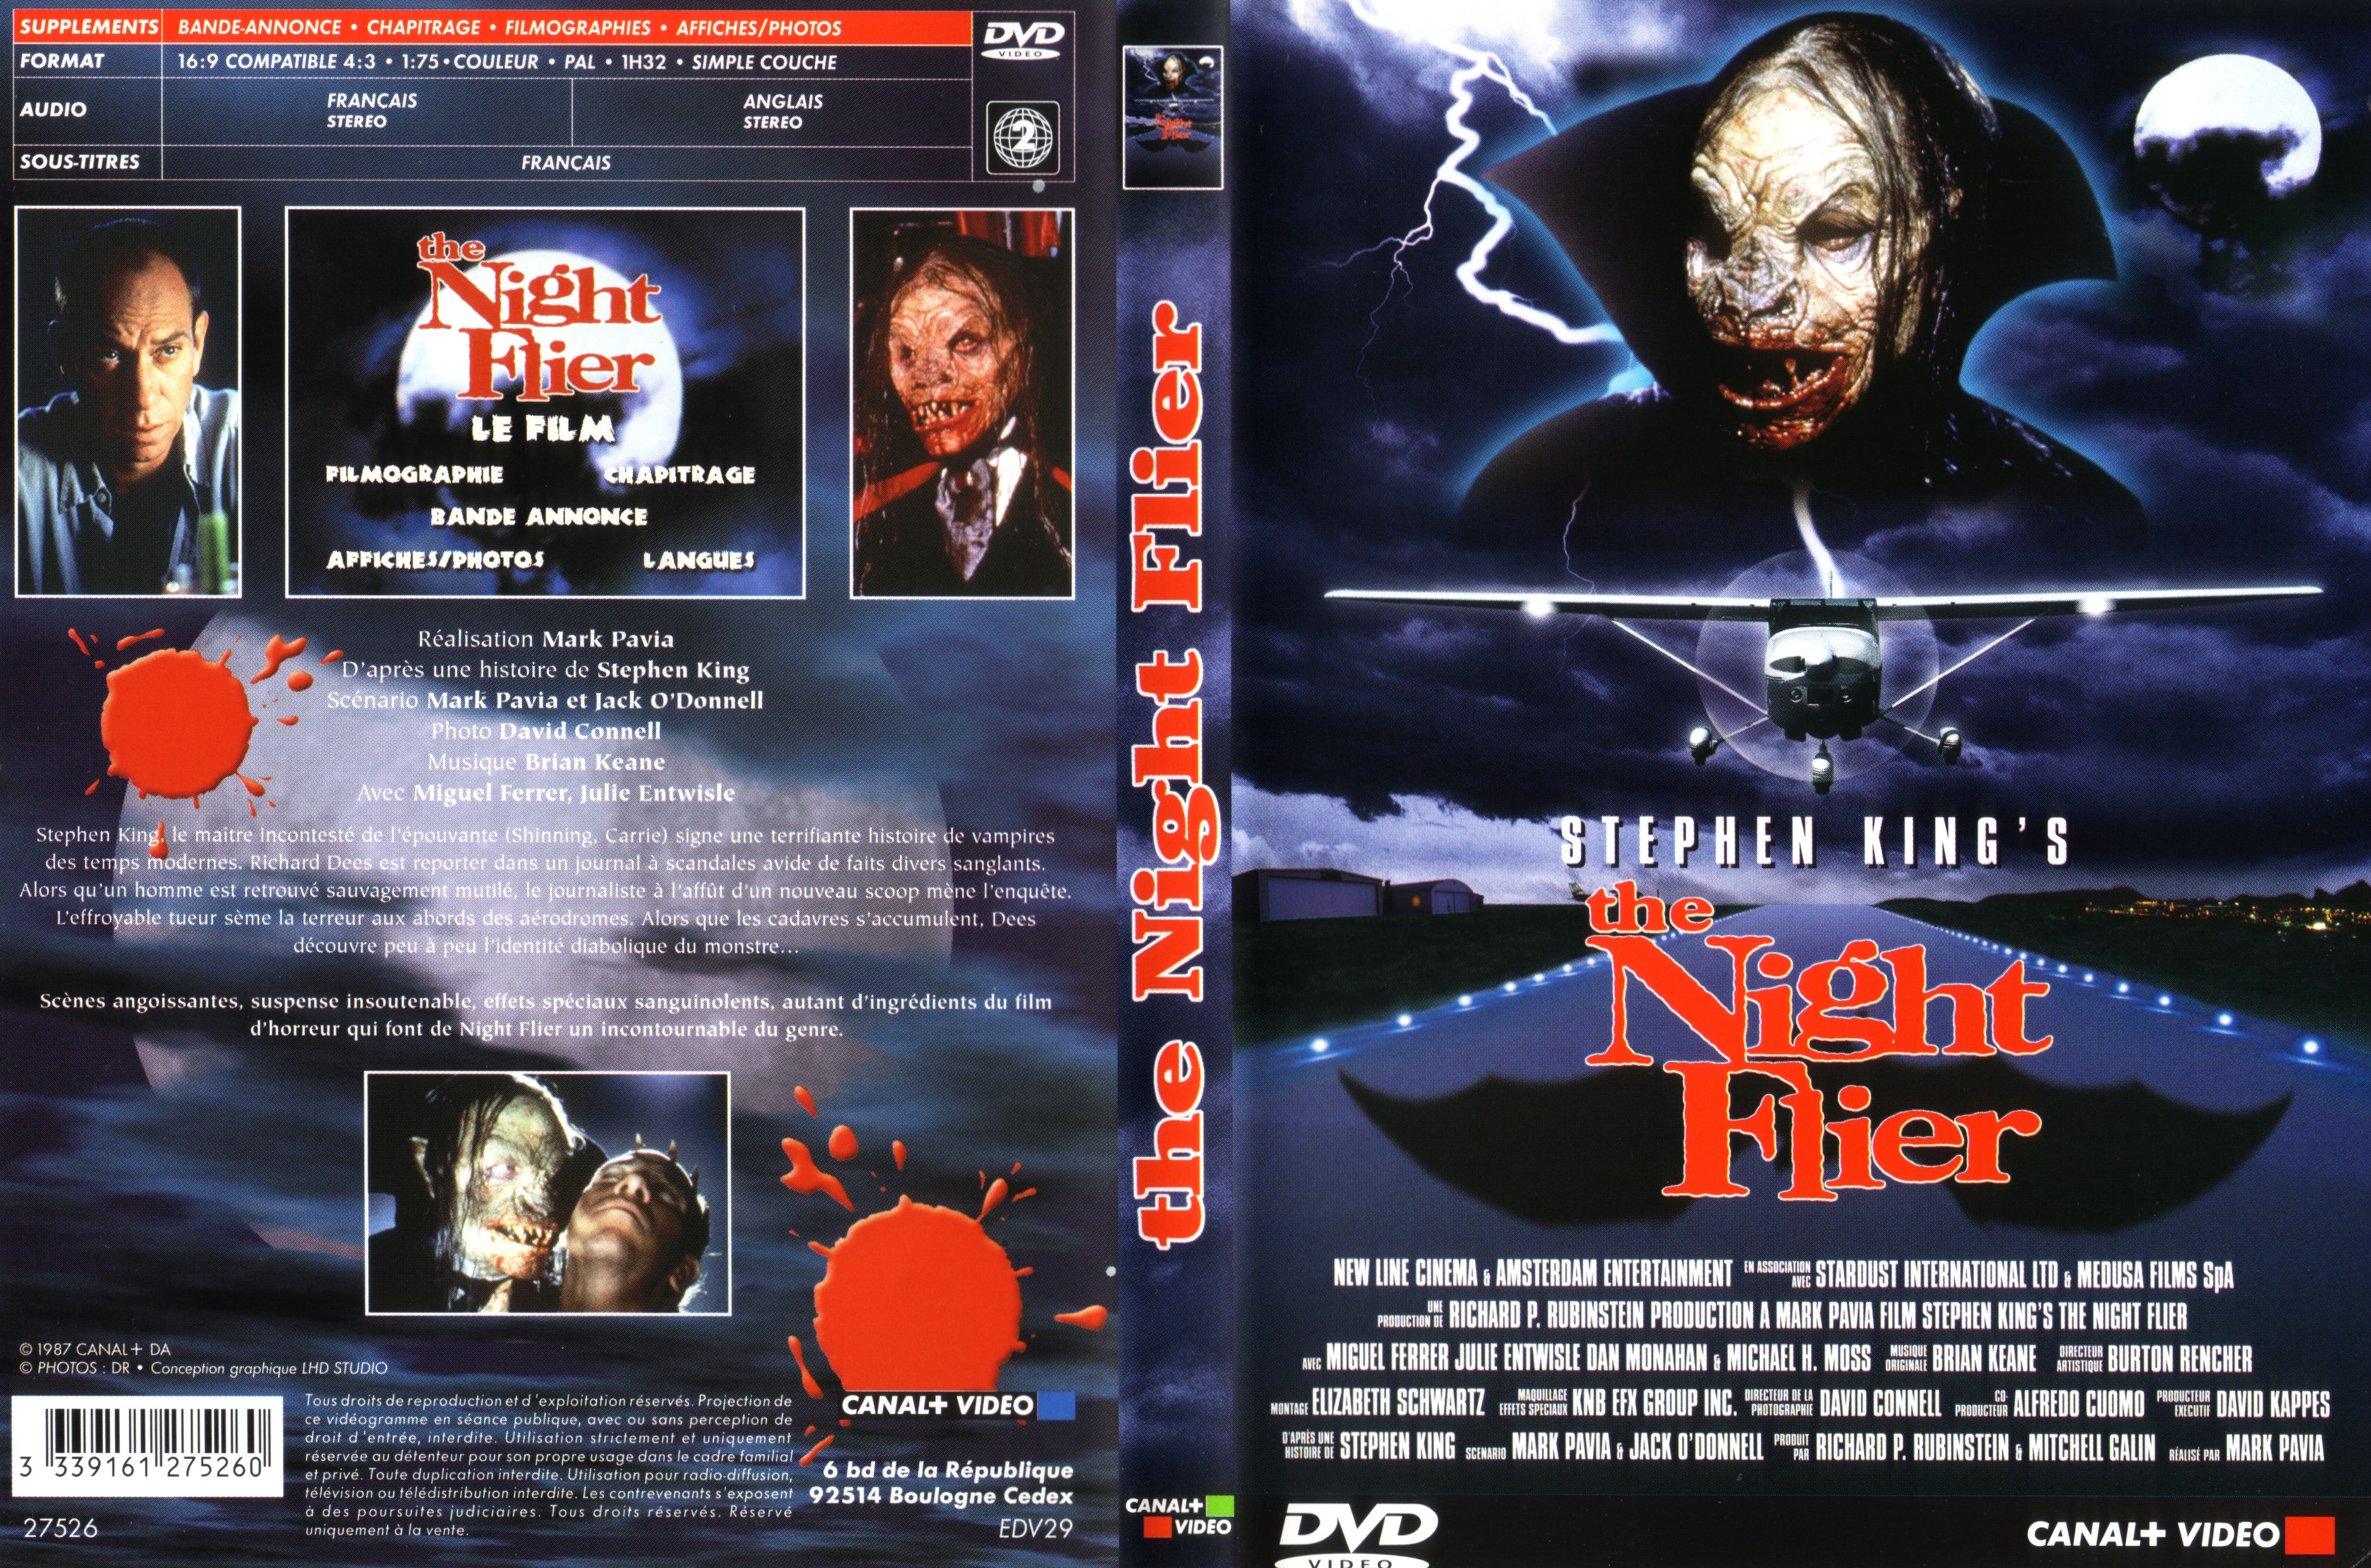 Jaquette DVD The night flier